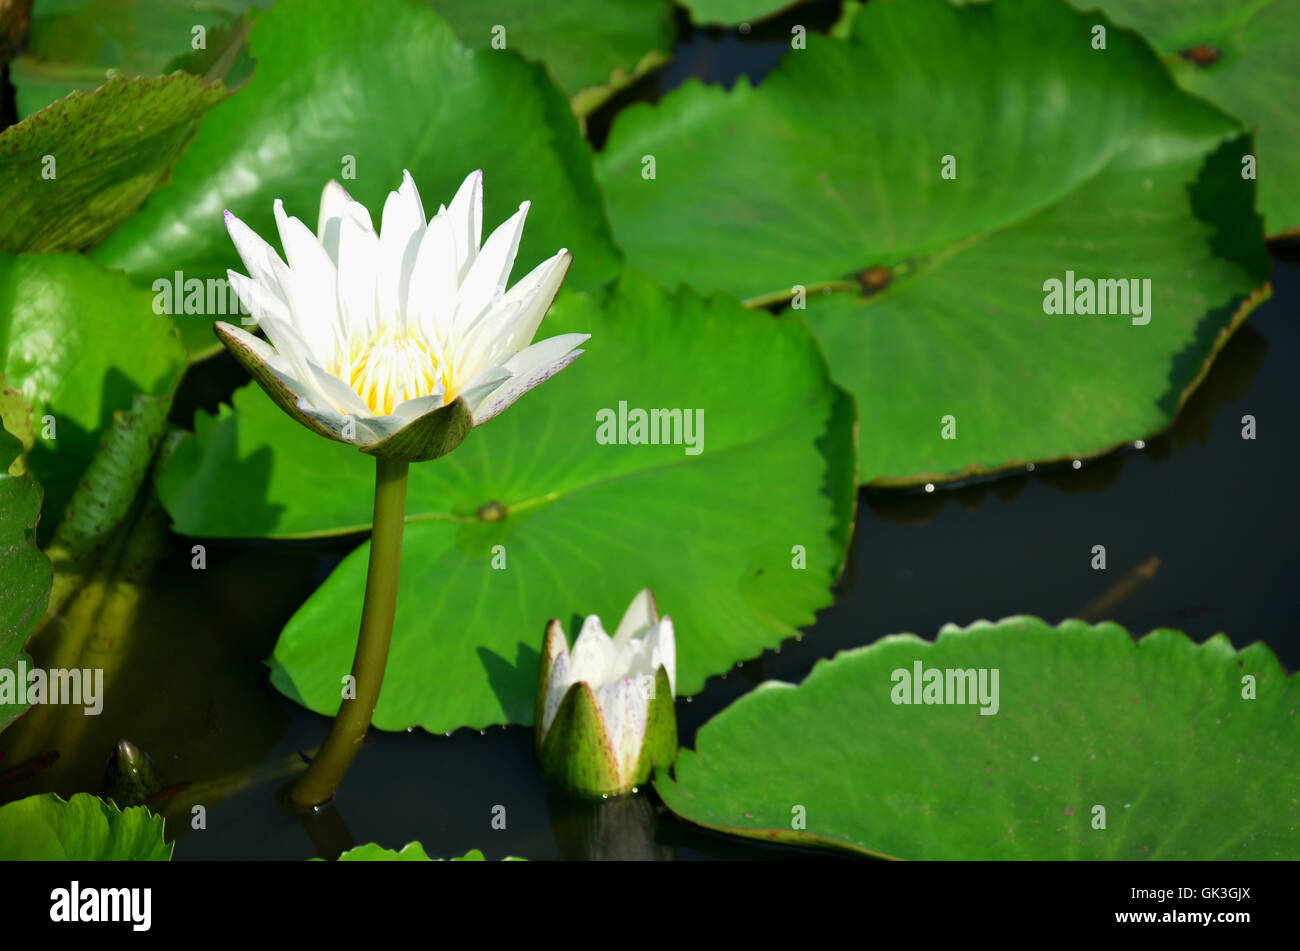 White lotus flower or water lily blossom with Molly fish or Swordtail fishes swimming in water tank at garden Stock Photo